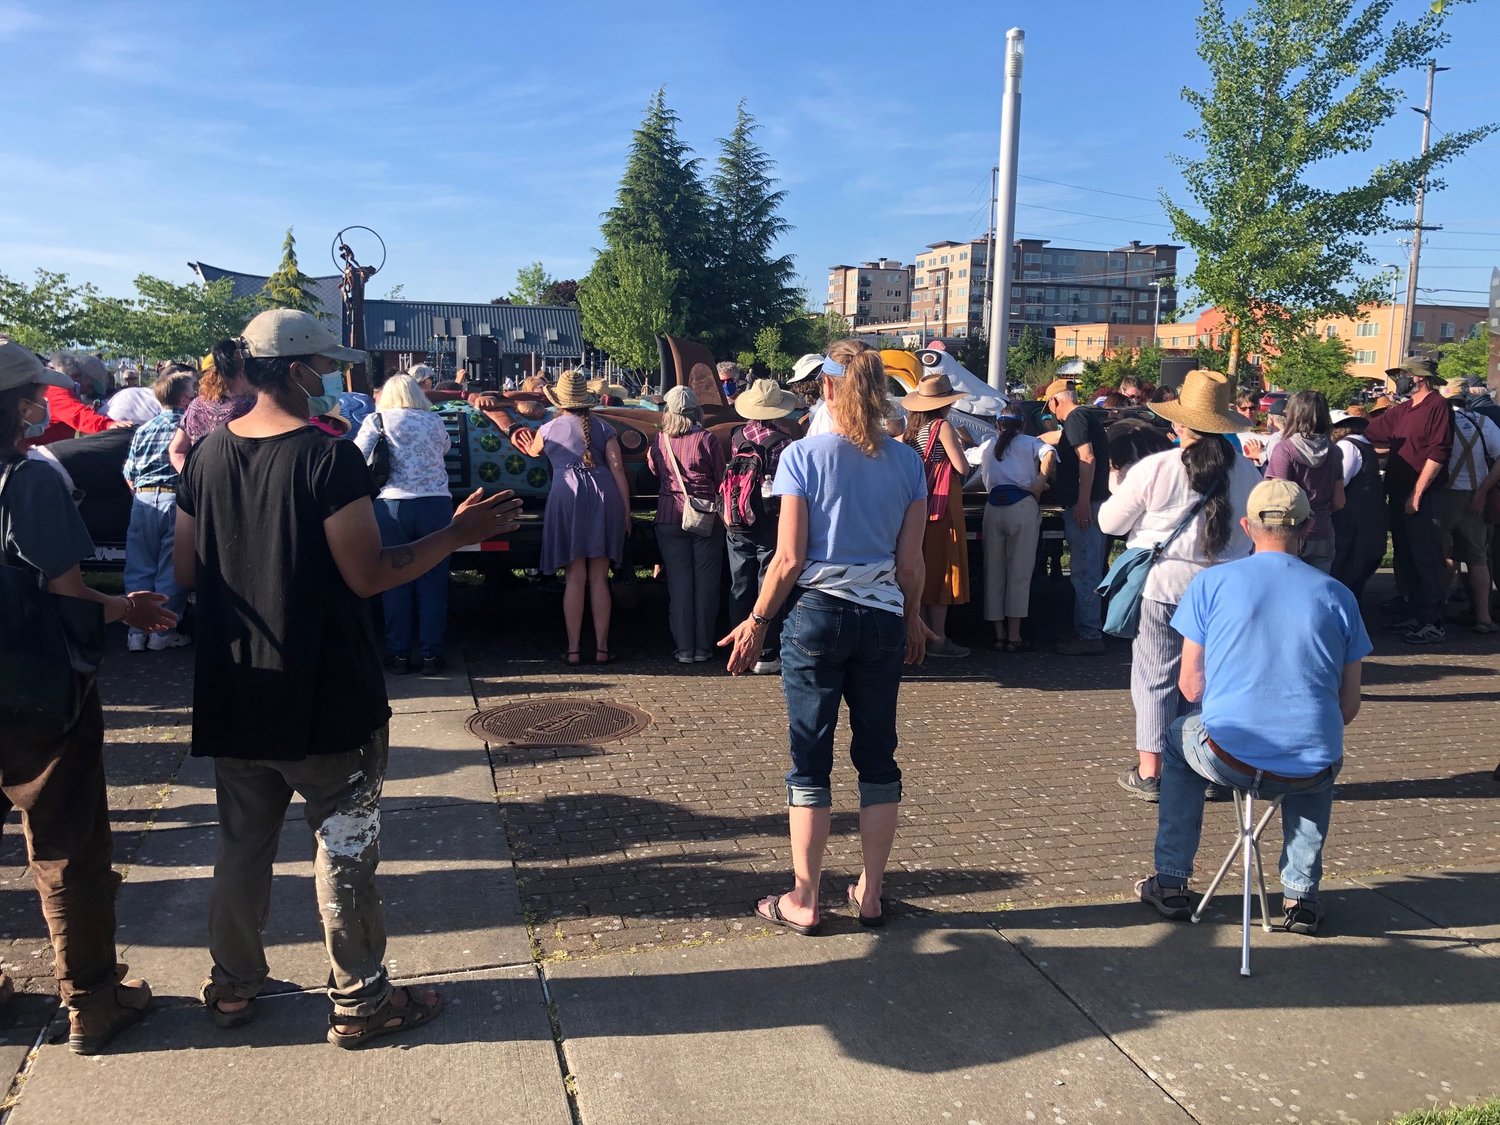 Some of the 200 people who attended the dedication ceremony at Percival Landing in Olympia, May 15, 2021.